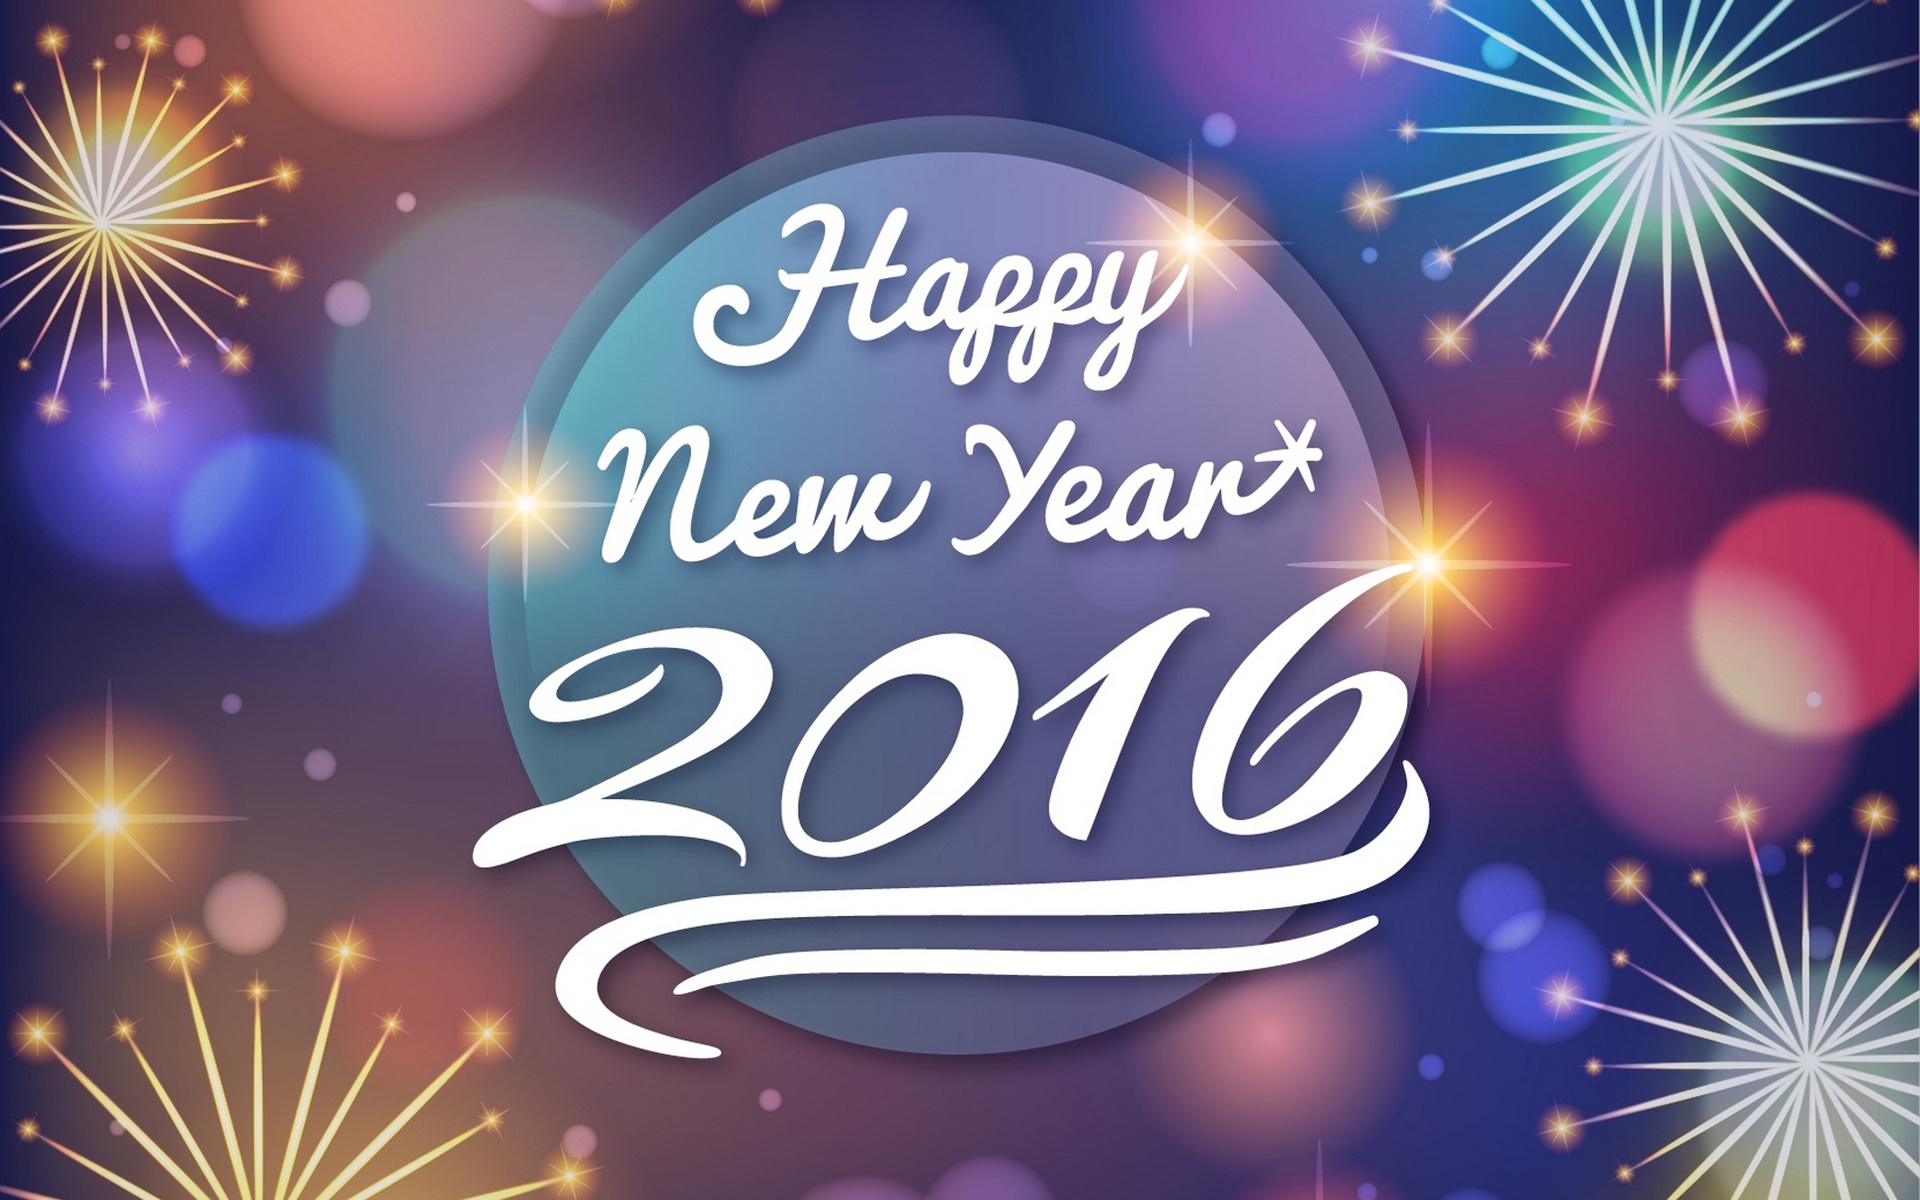 Happy New Year 2016 Wallpapers HD Wallpapers 1920x1200